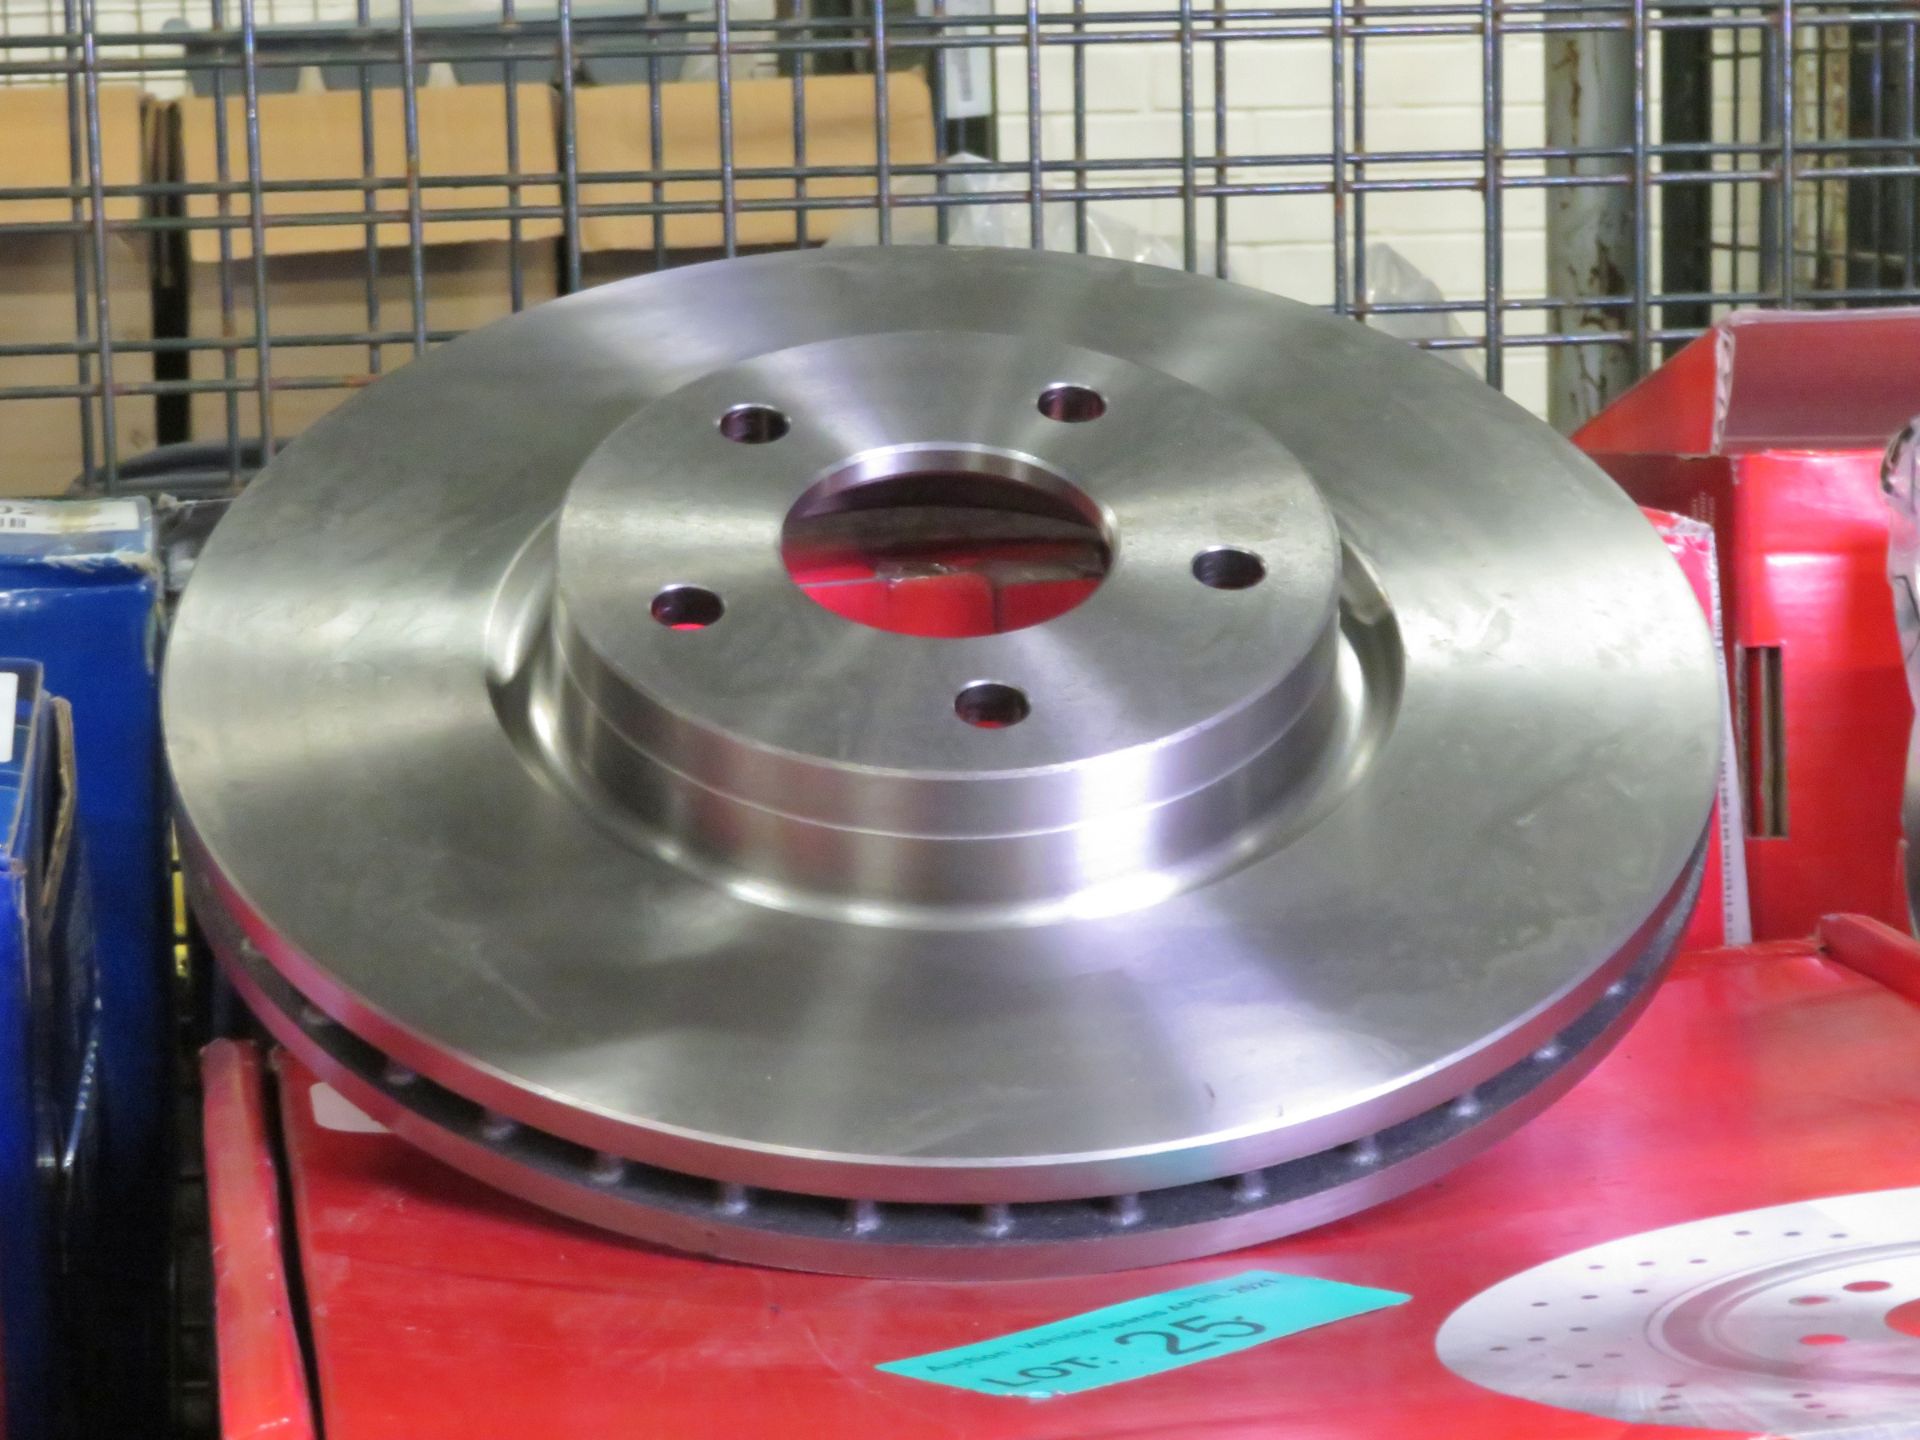 Vehicle parts - Don, Pagid, Eicher, MIntex, Drivemaster brake discs - see picture for itin - Image 2 of 4